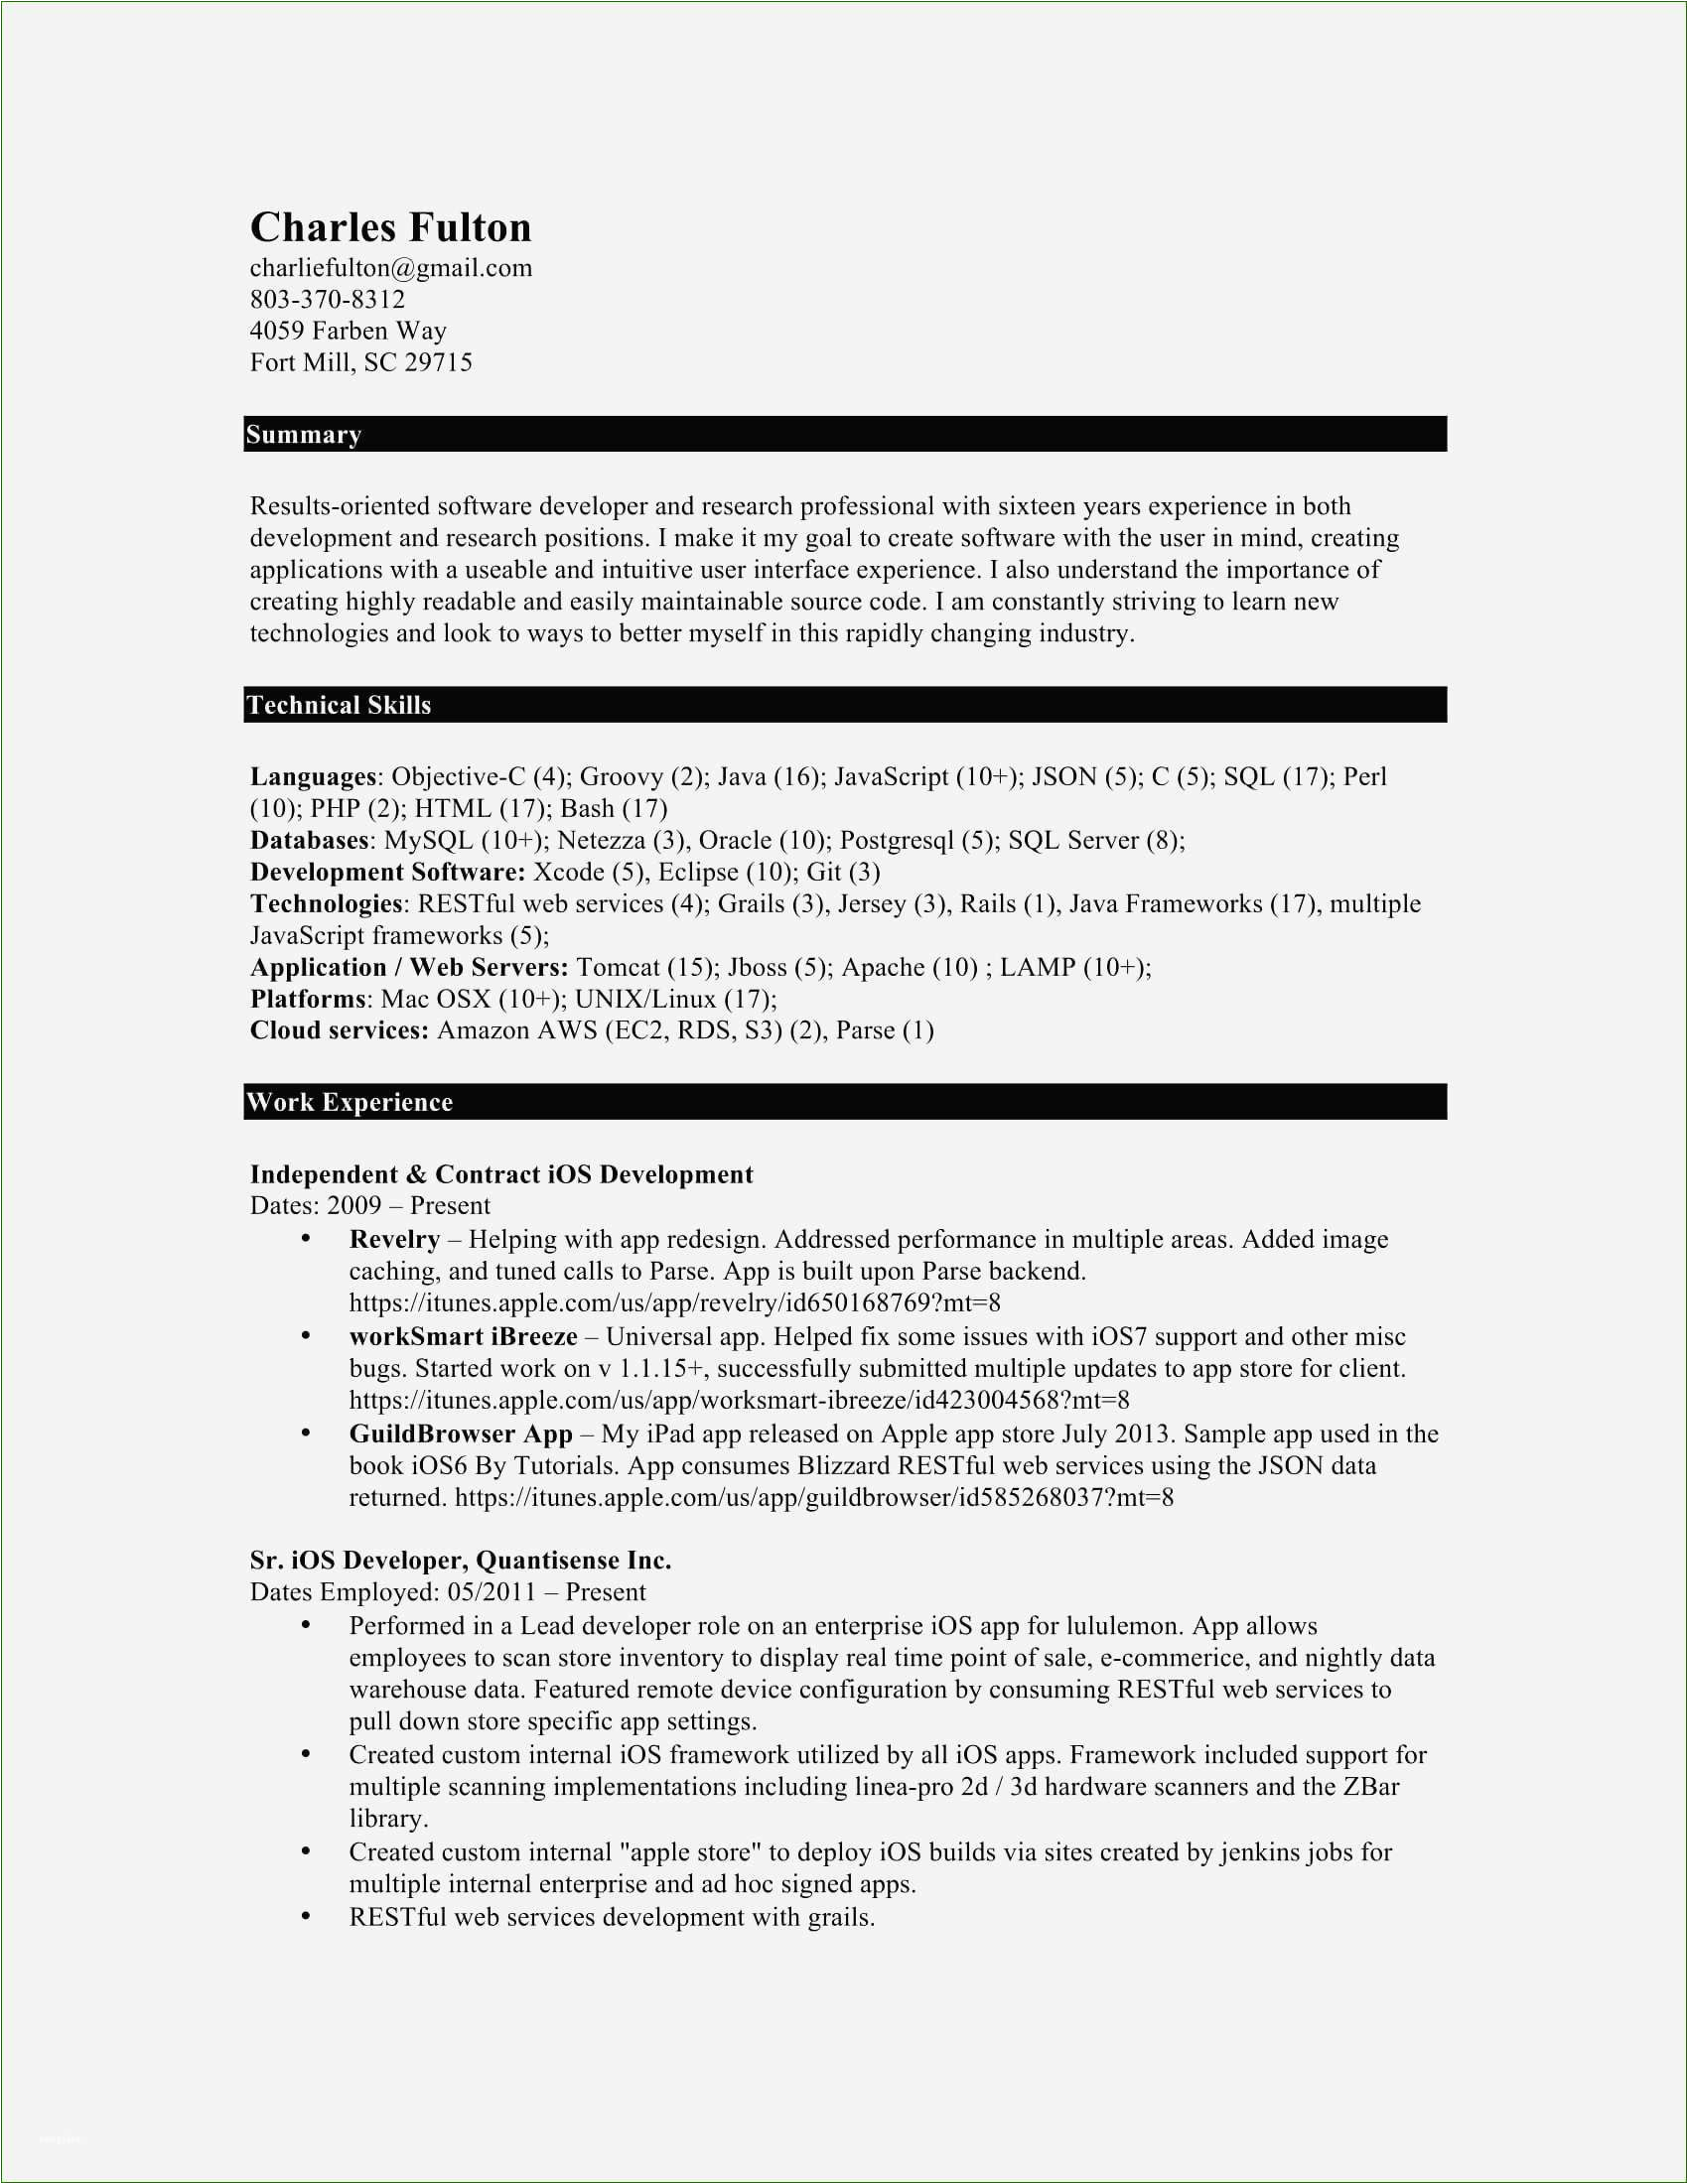 Resume Template for Experienced software Engineer 10 Years Experience software Engineer Resume